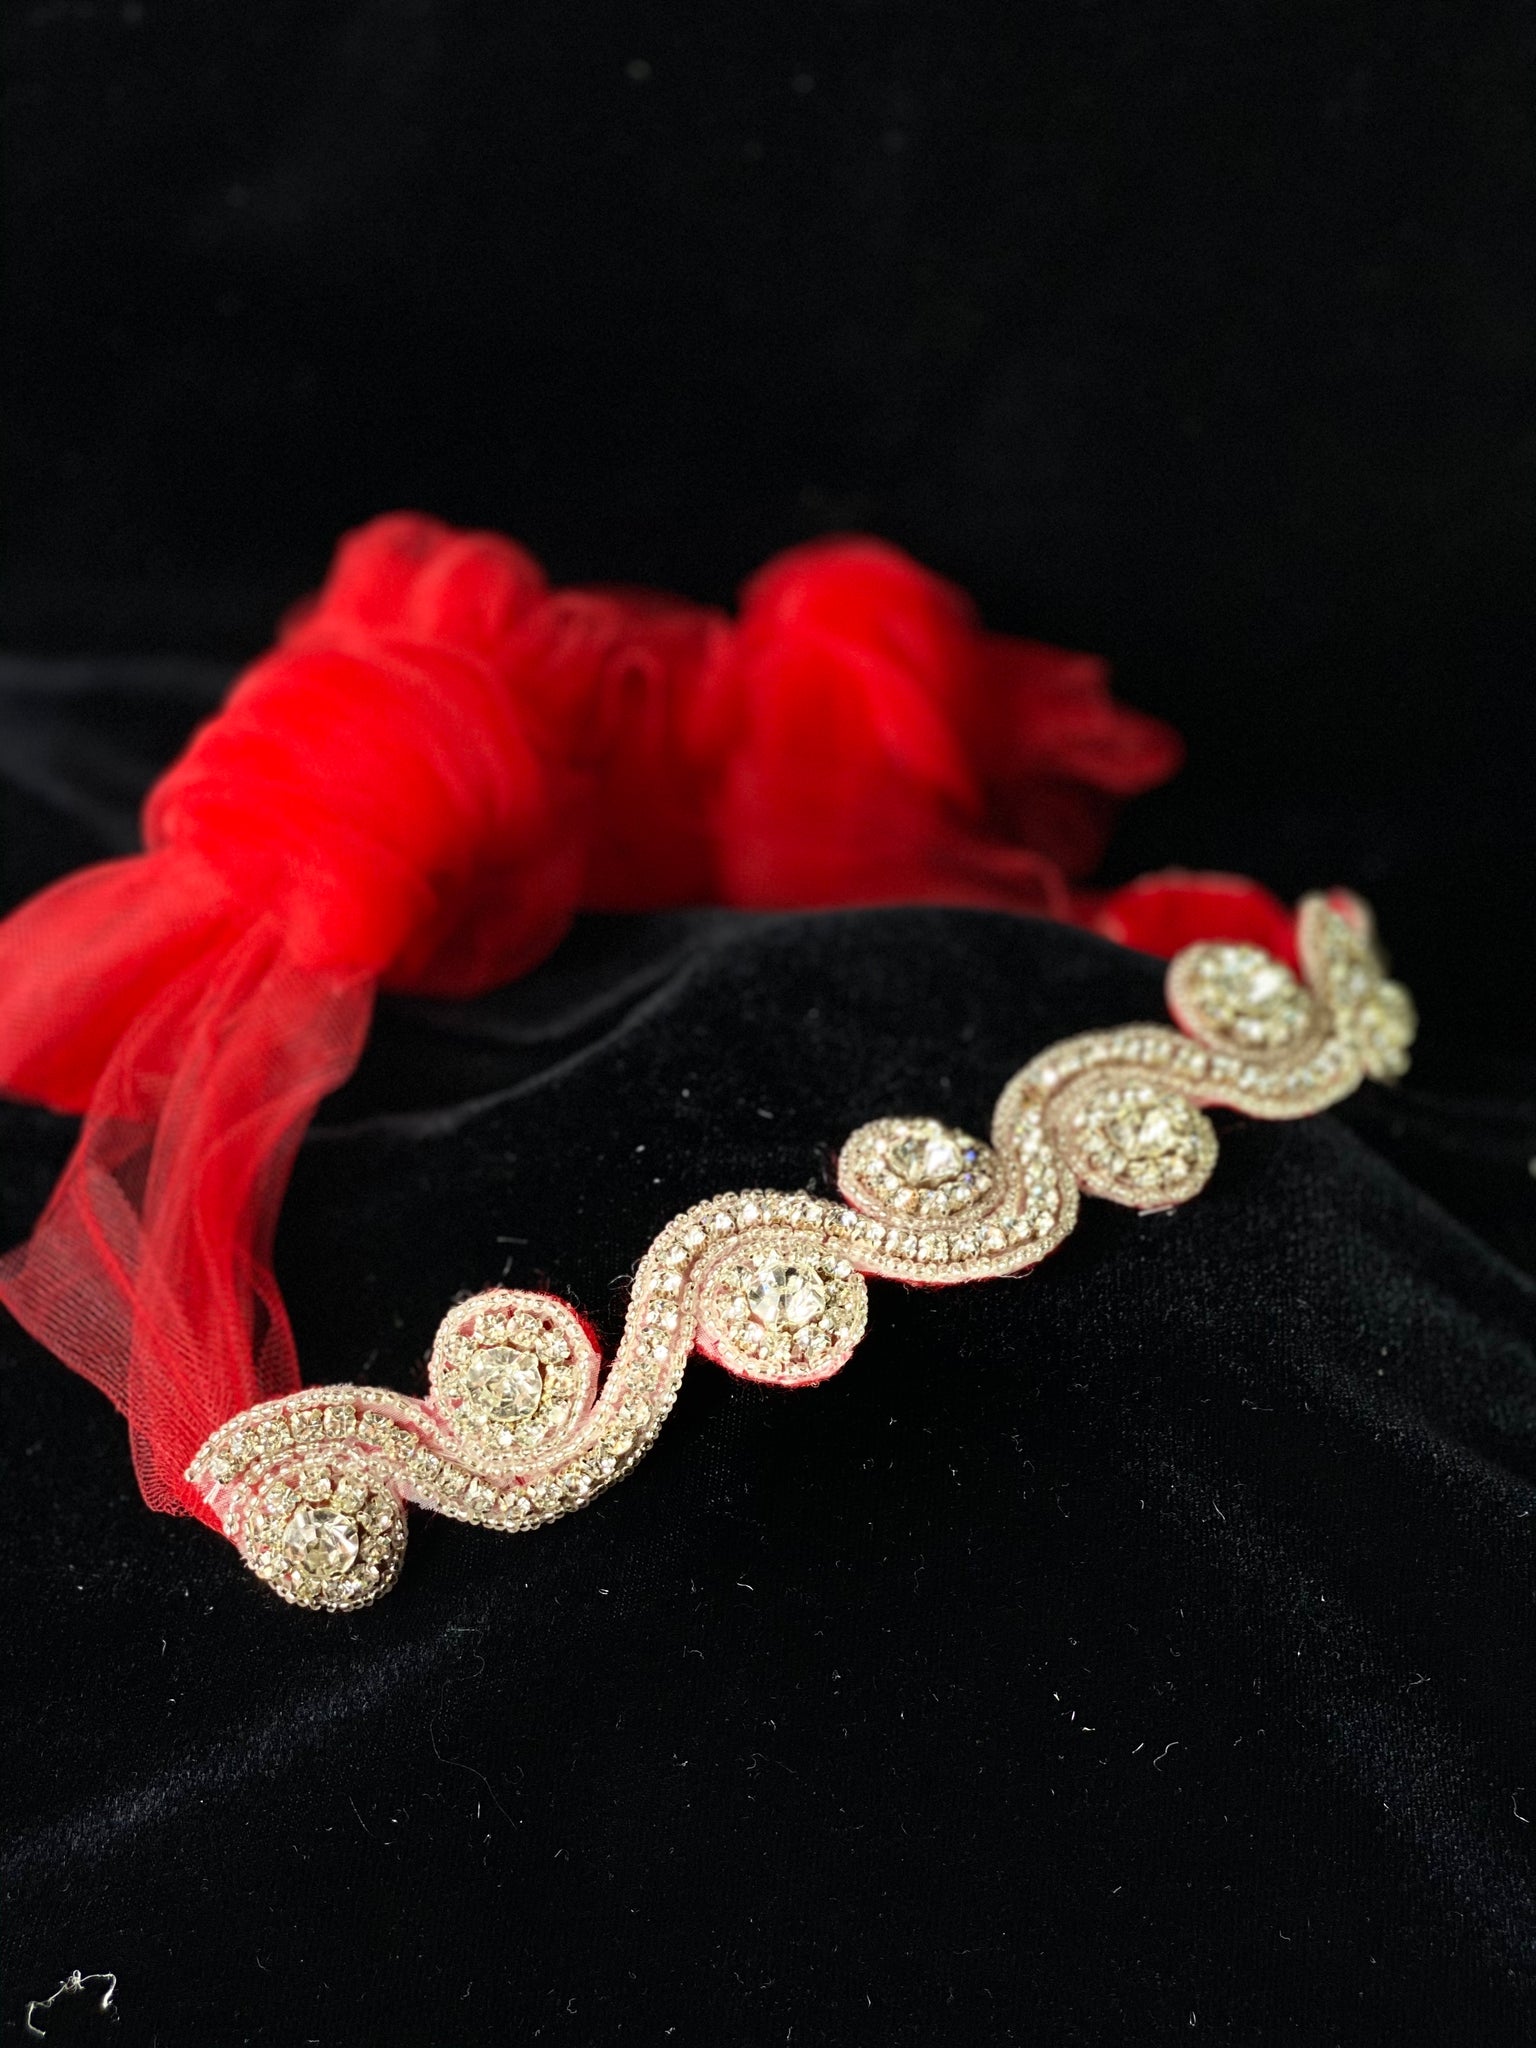 Headband with Strings - Champagne Flower and Tulle Strings  This is an elegant unique handmade and one-of-a-kind headband with a swirl design on red velvet material.  The swirl design is made of beads and rhinestones giving it a gold look and the long red tulle strings are attached.